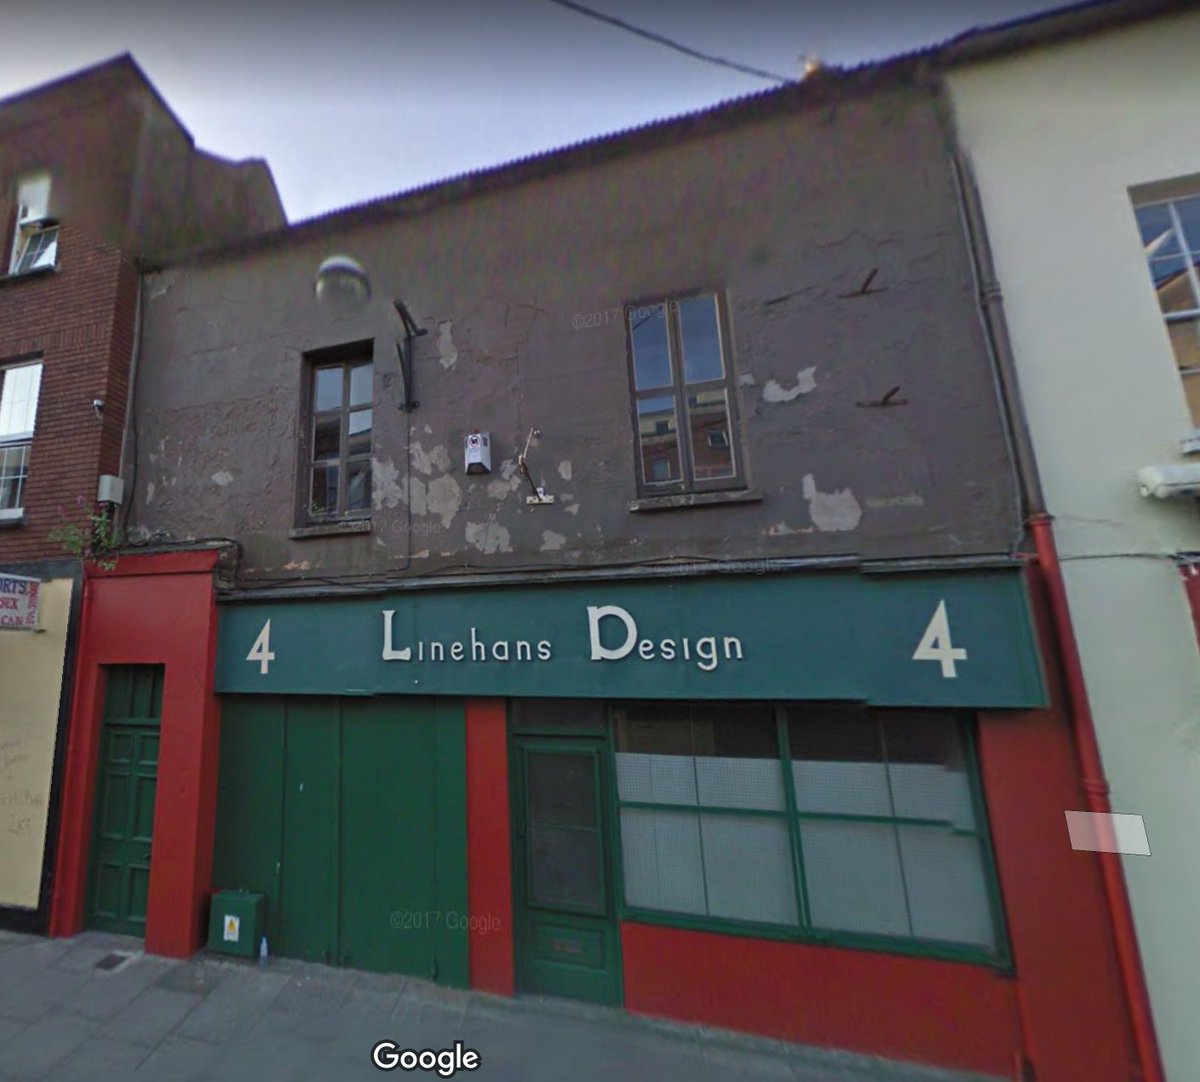 planning was recently applied to turn this old retail space & some land at the rear into city centre accommodation seems its been empty & decaying for a while (image RHS  @googlemaps 2009) soit becomes someones home In Cork soonNo.146  #Regeneration  #Respect  #HousingForAll